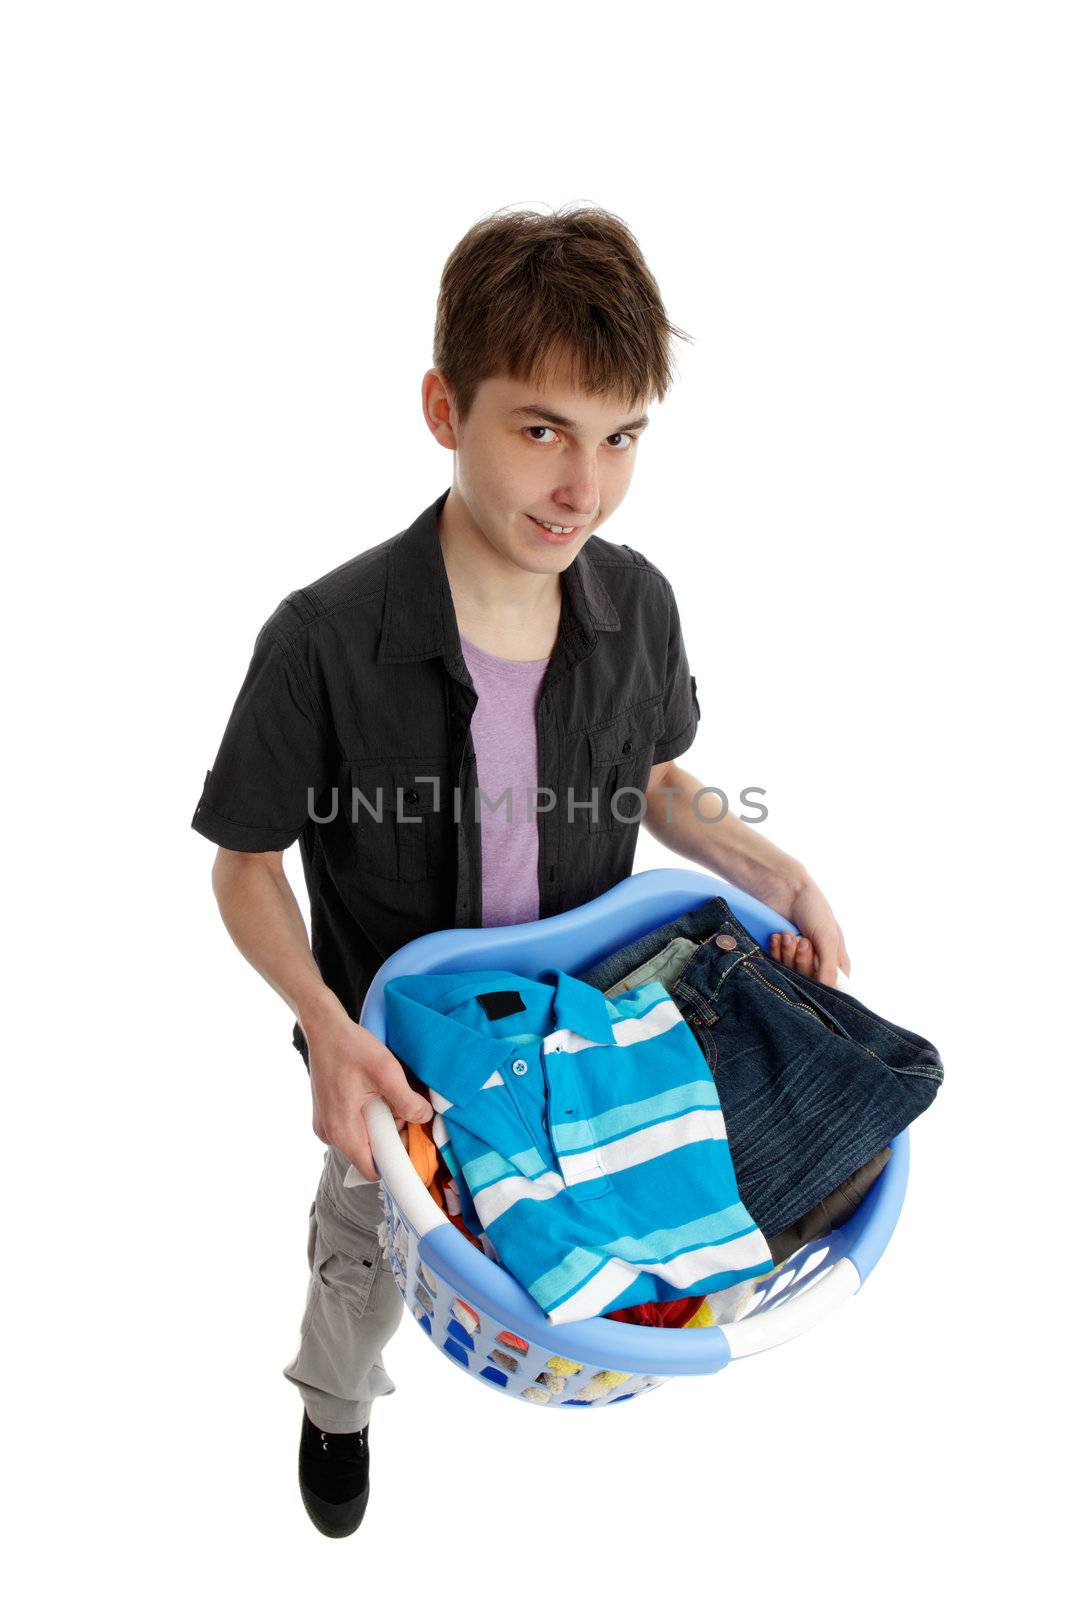 Smiling teenager with a basket of laundry or ironing.  White background.